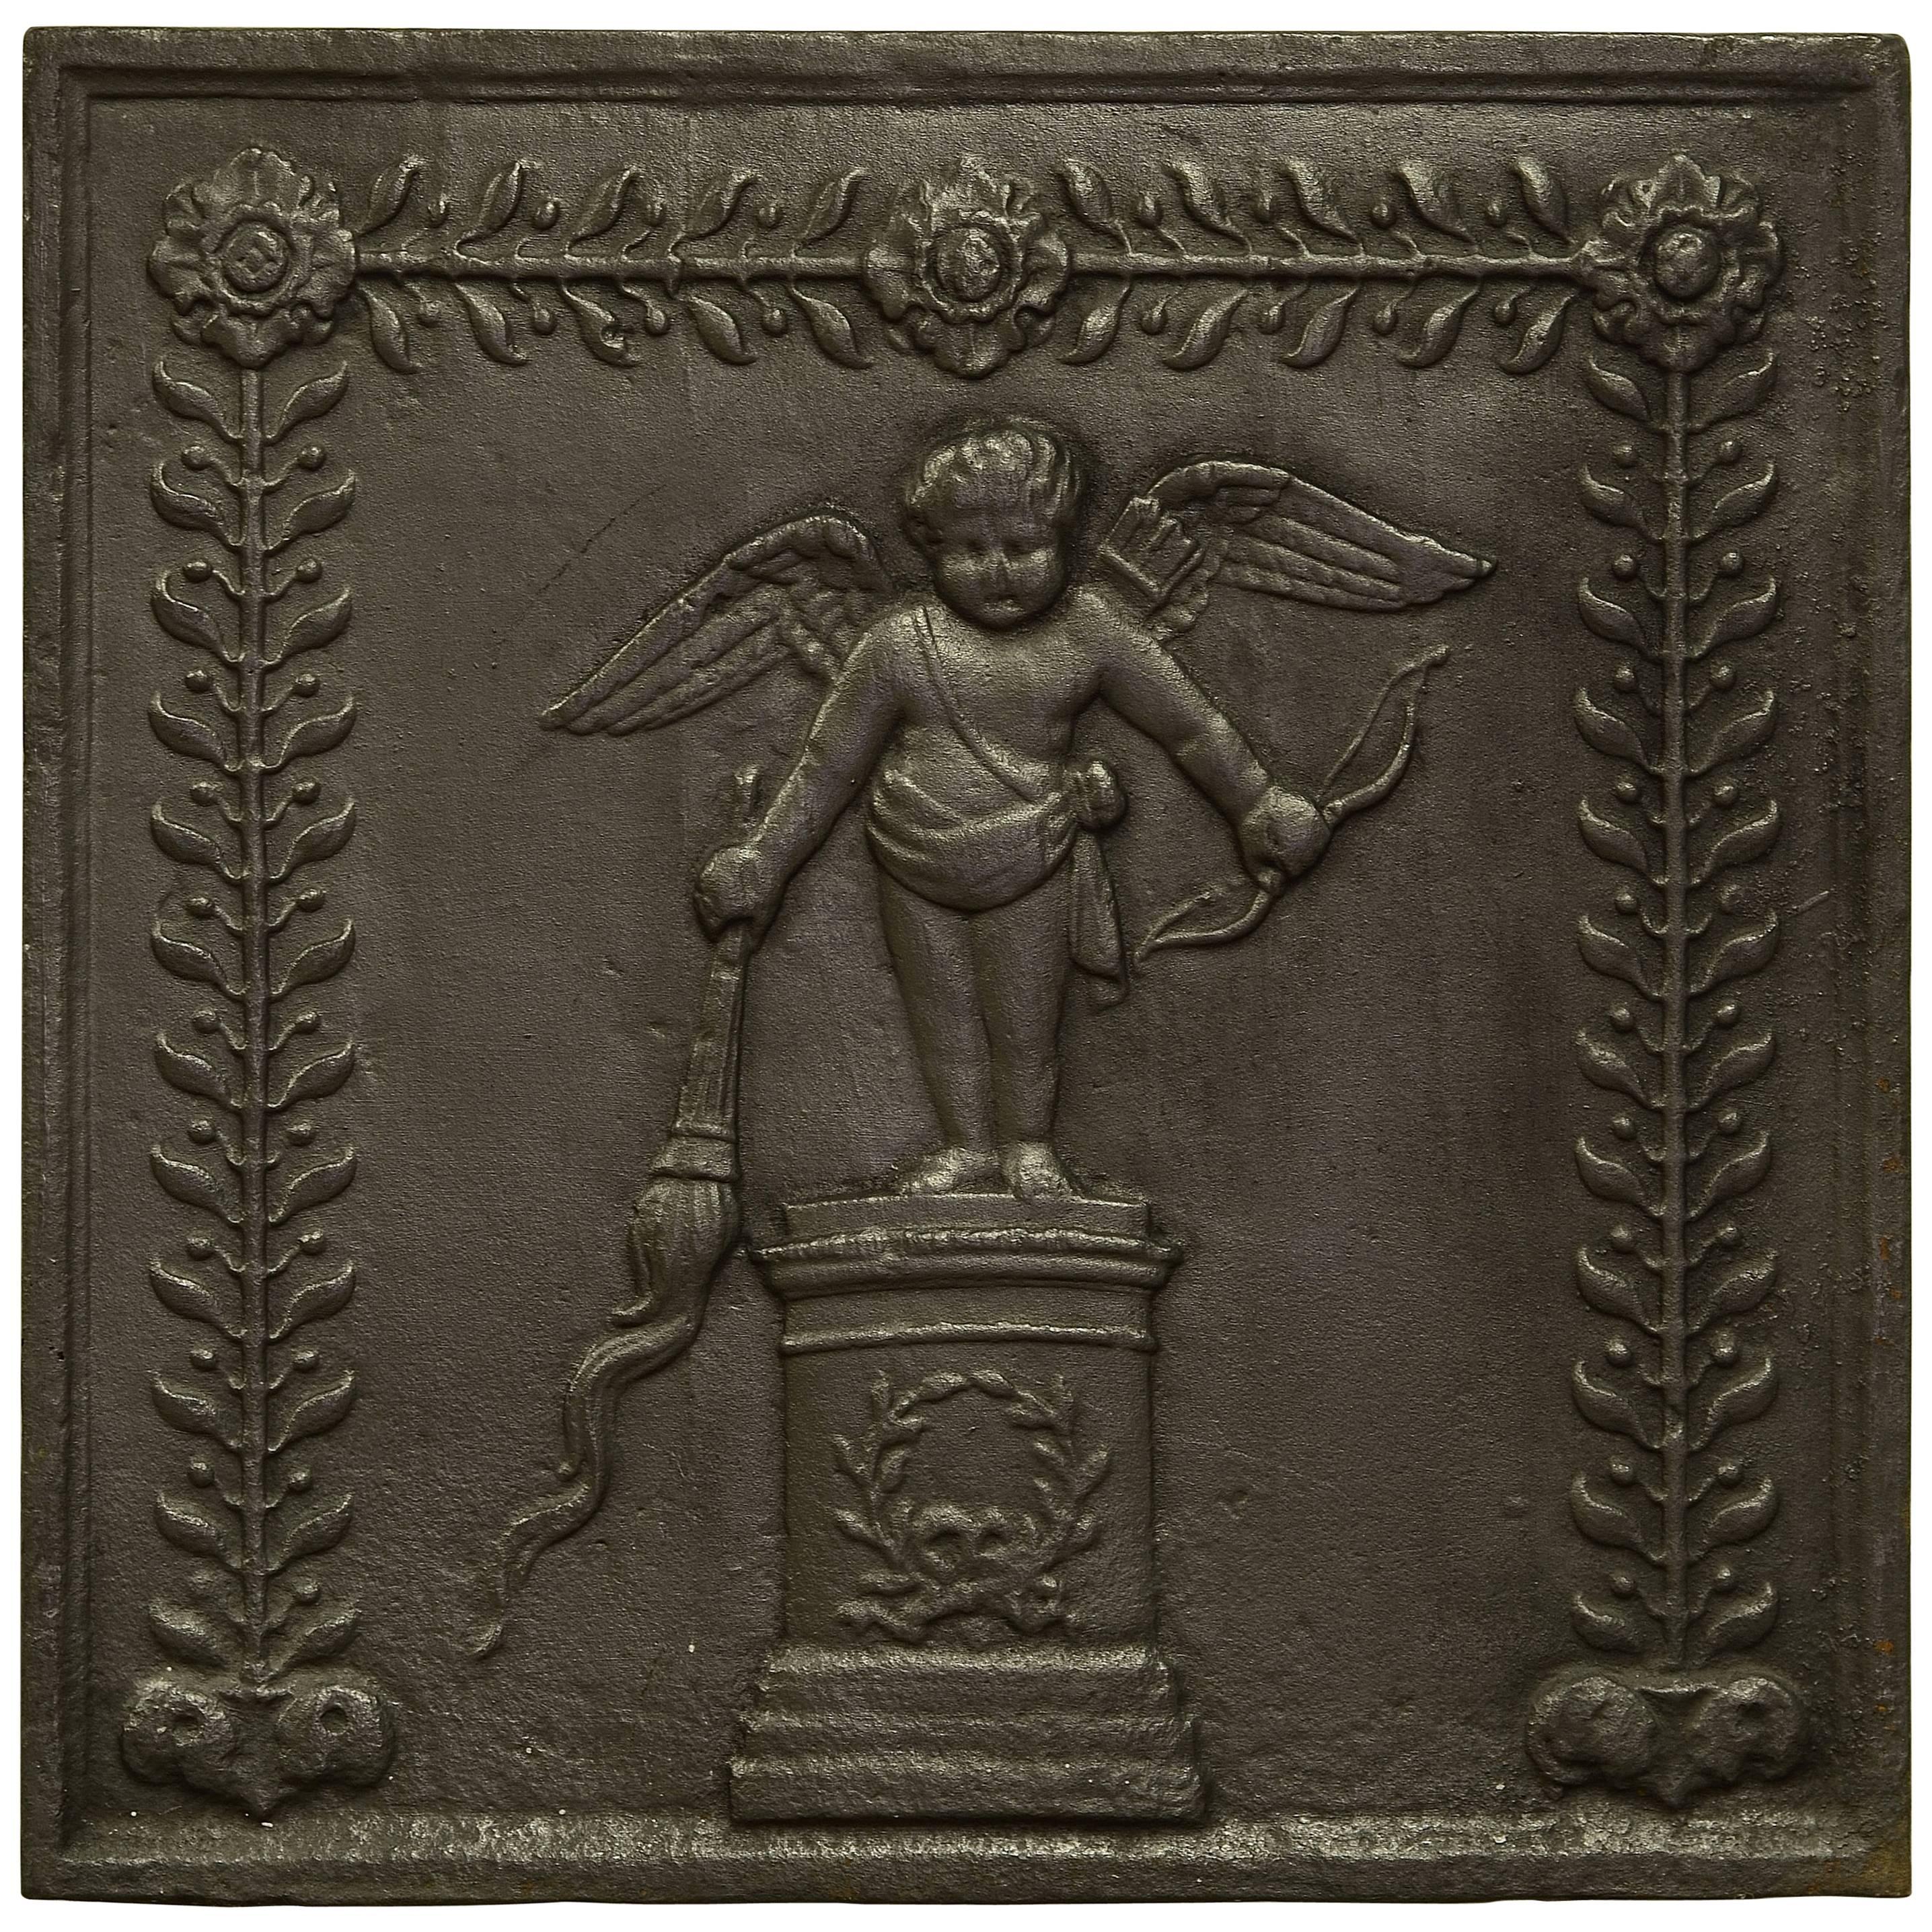 Antique Square Fireback, Cupid with Bow and Torch, 19th Century